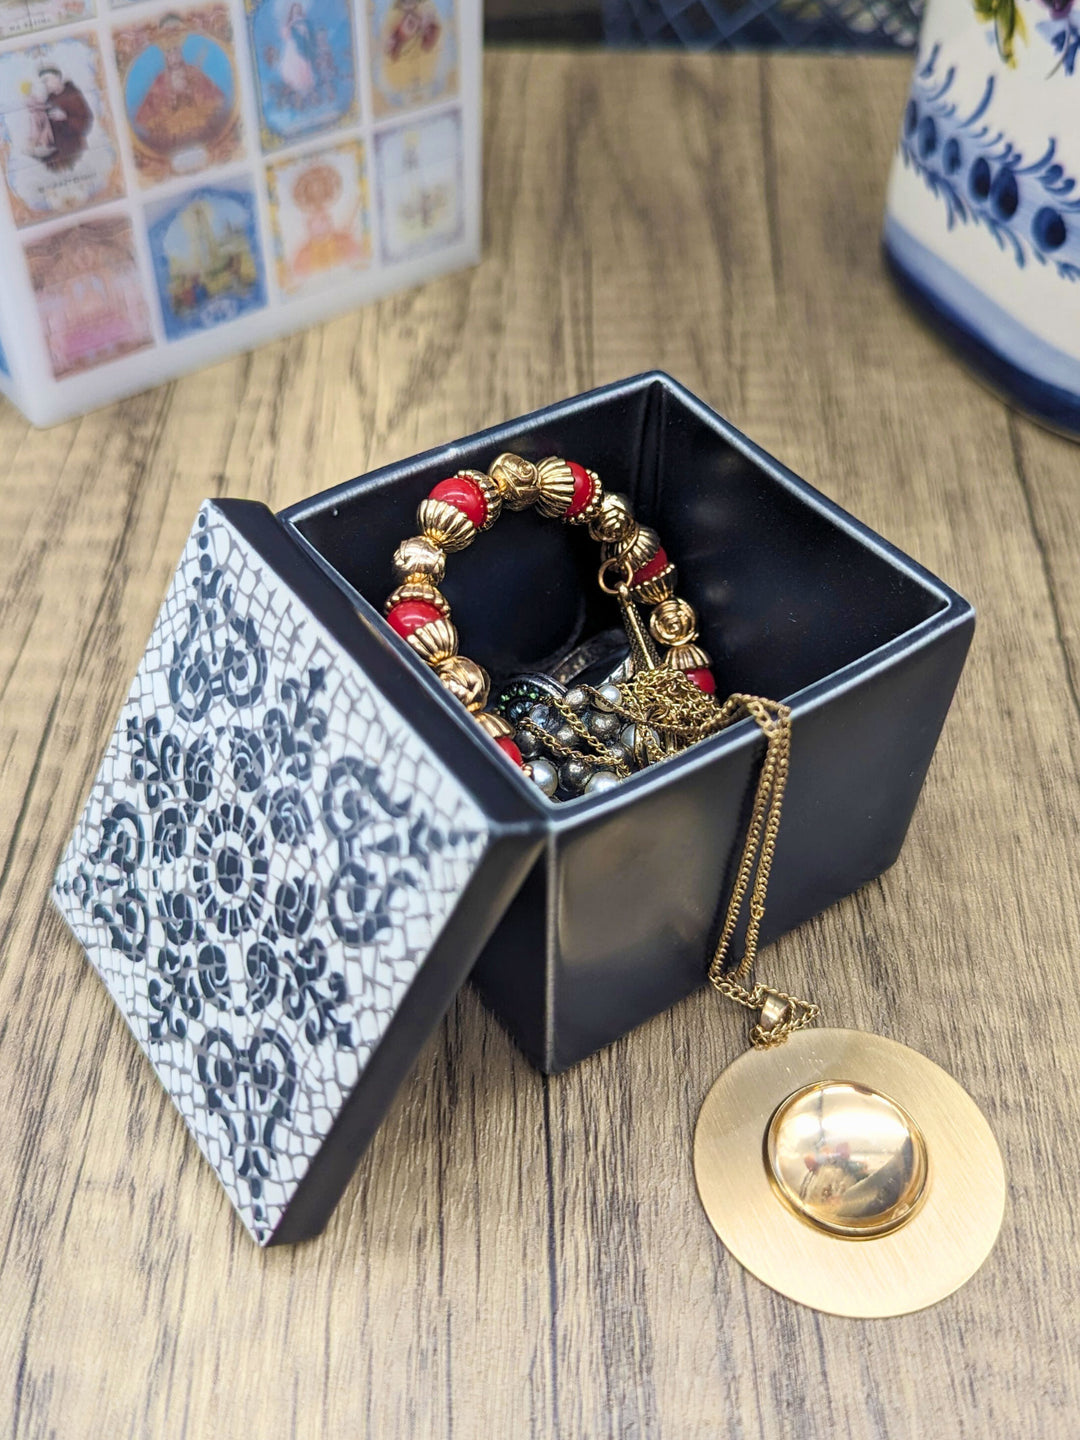 Hand Painted Decorative Ceramic Box with Lid - Inspired by Portuguese Calçada